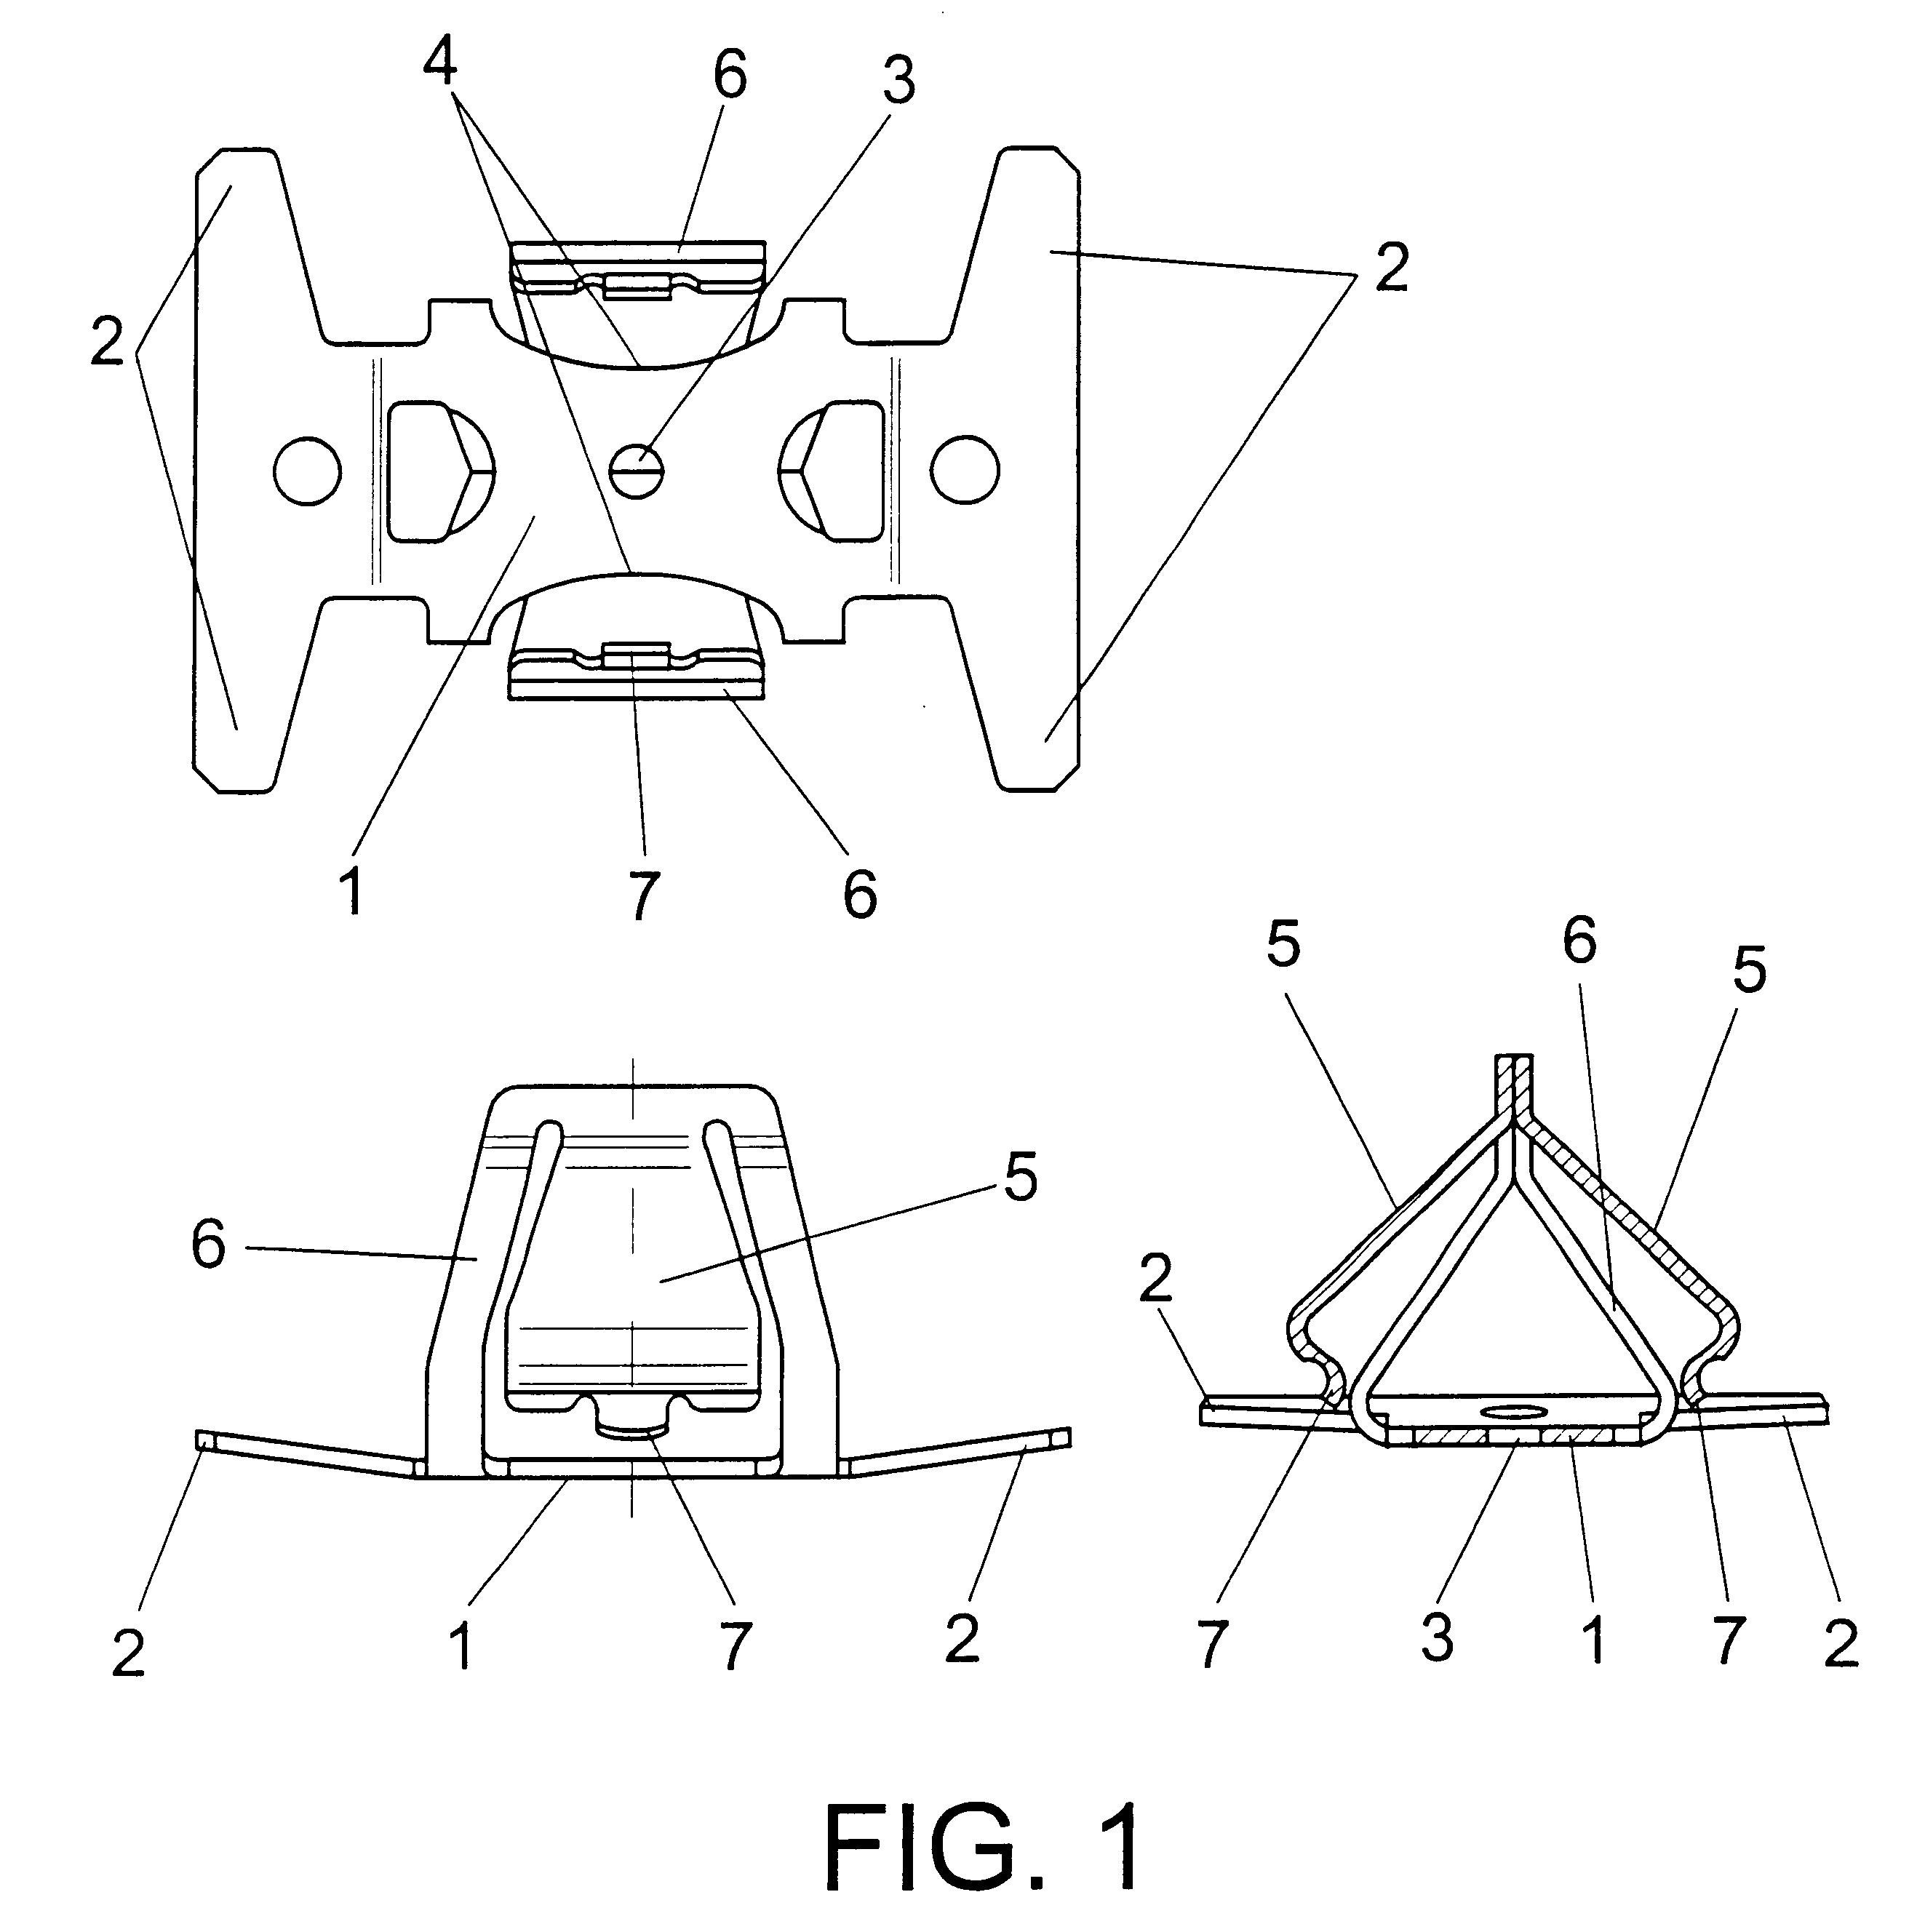 Accessory attachment system for vehicle interiors